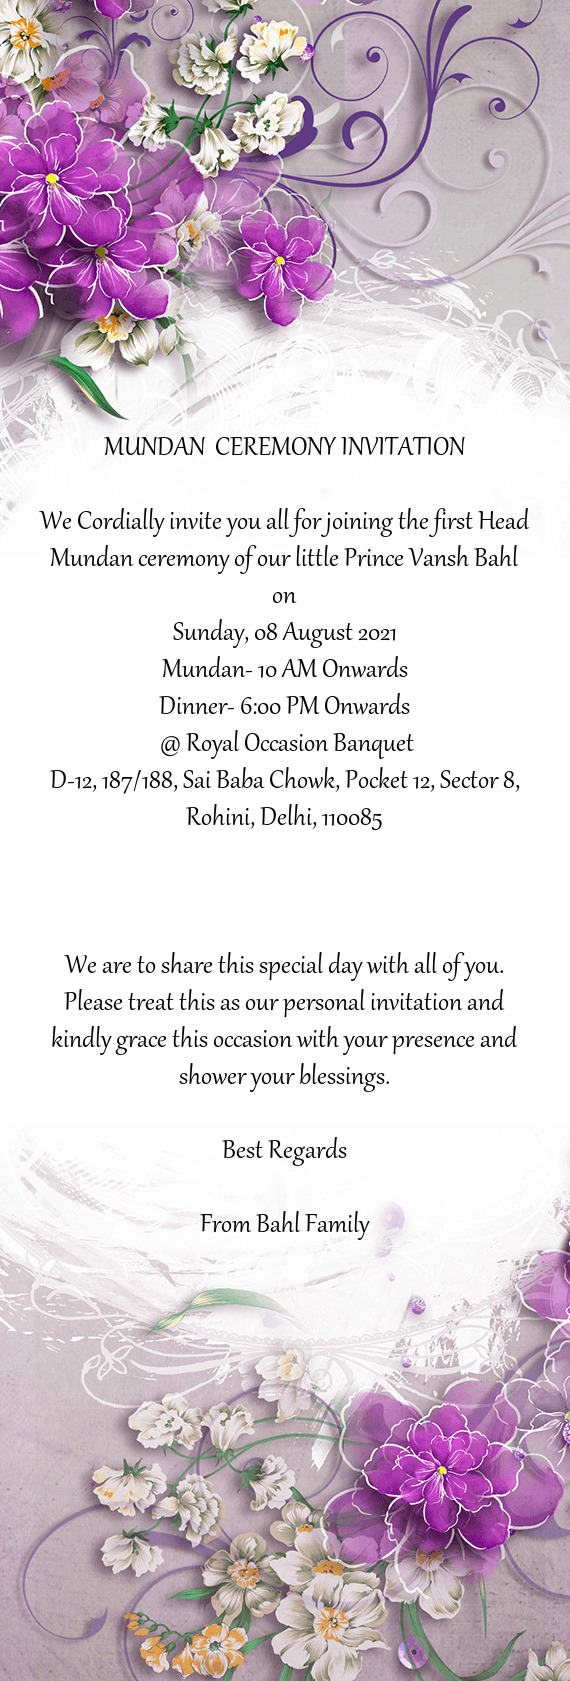 We Cordially invite you all for joining the first Head Mundan ceremony of our little Prince Vansh Ba